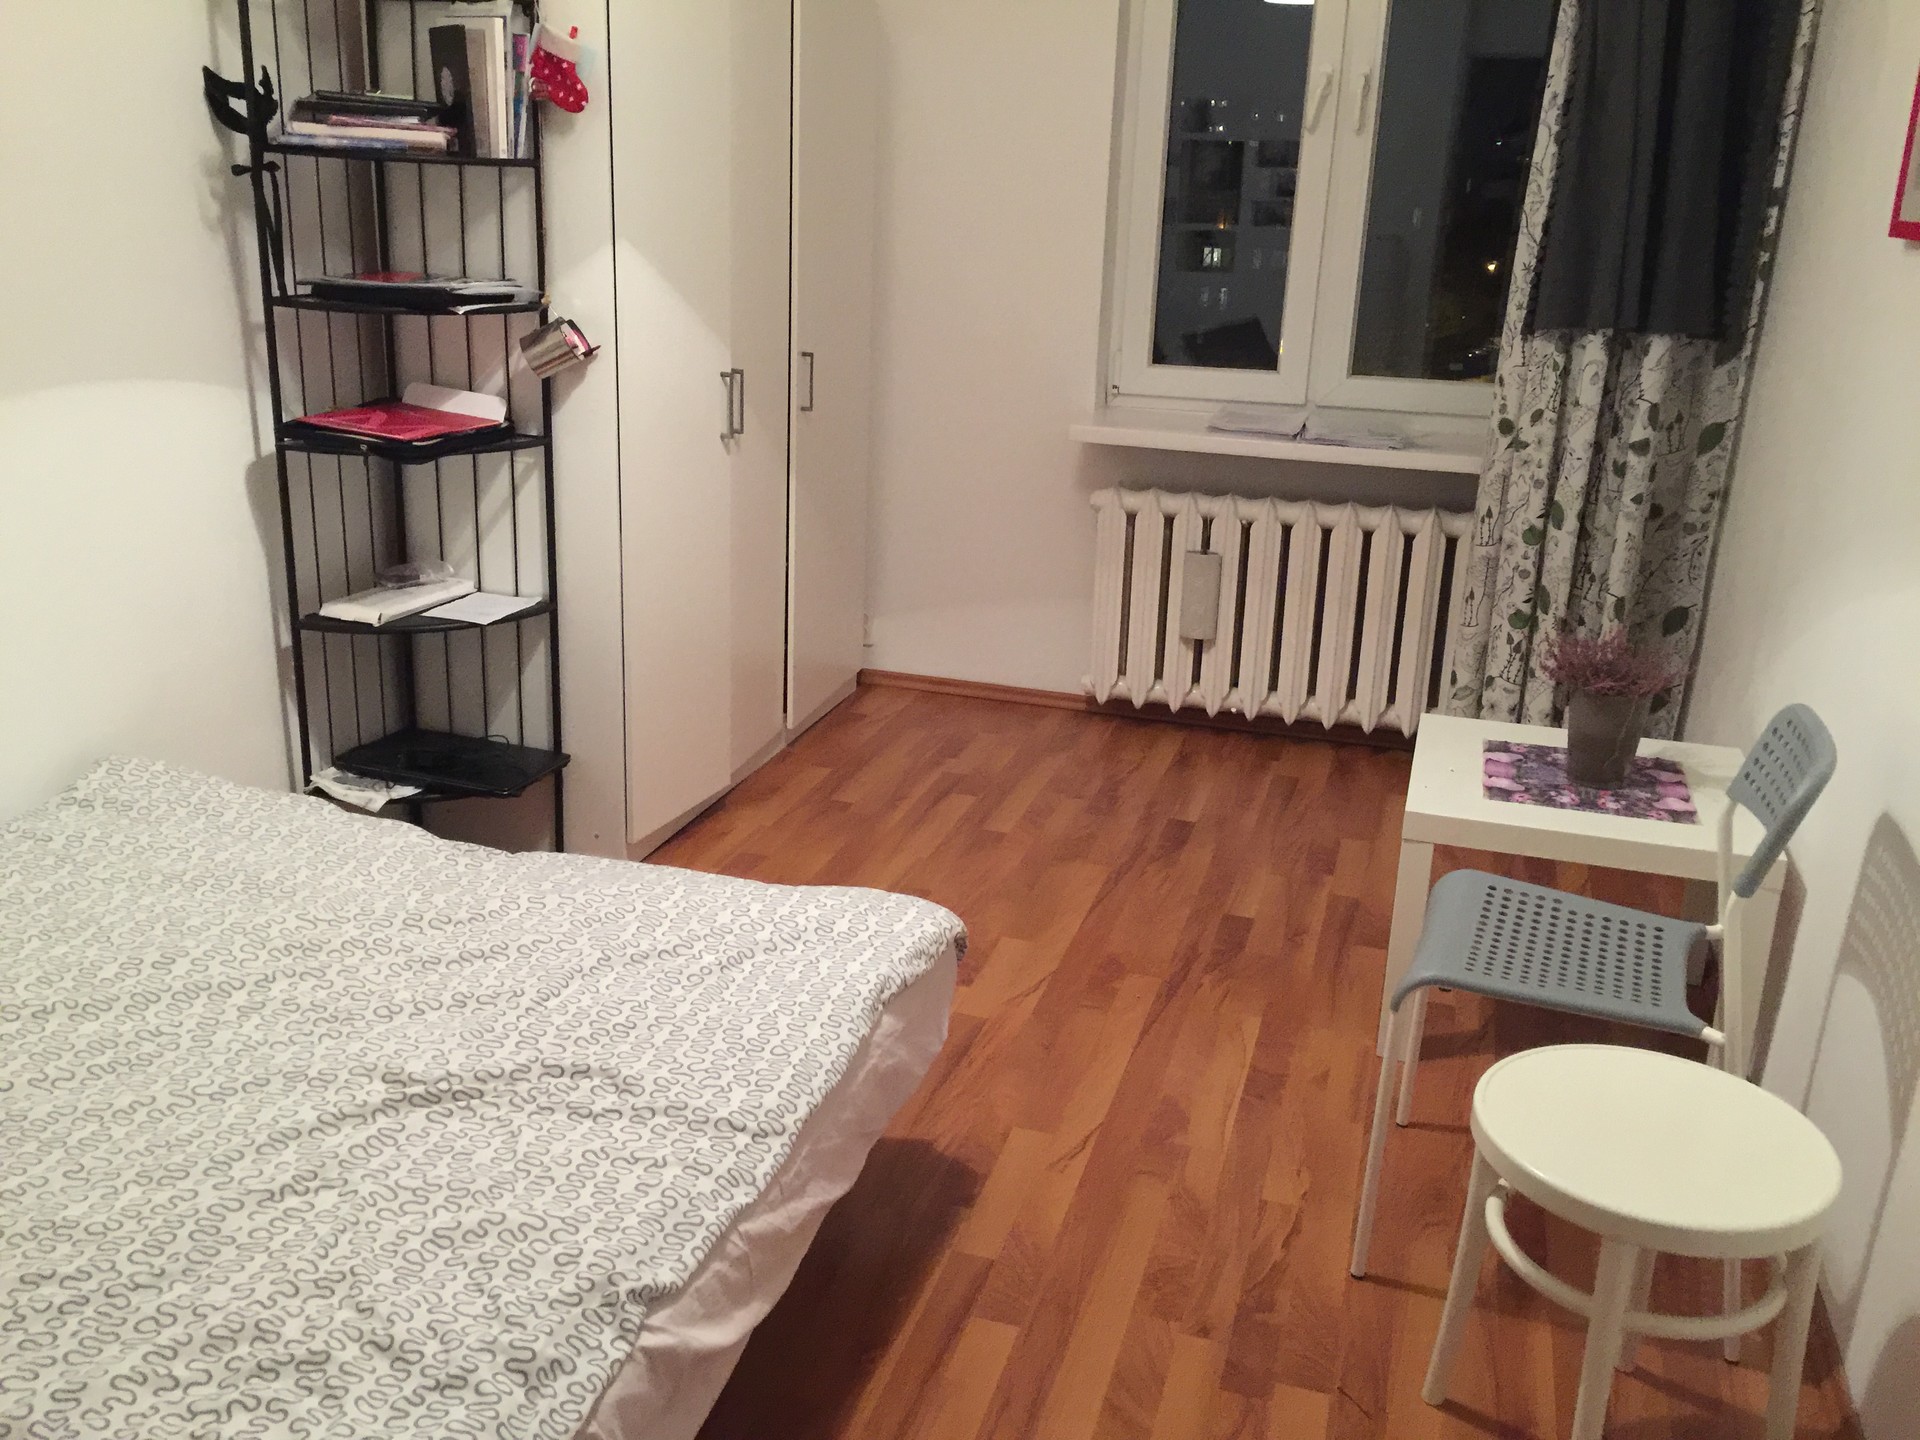 Excellent rooms in shared apartment | Room for rent Warsaw